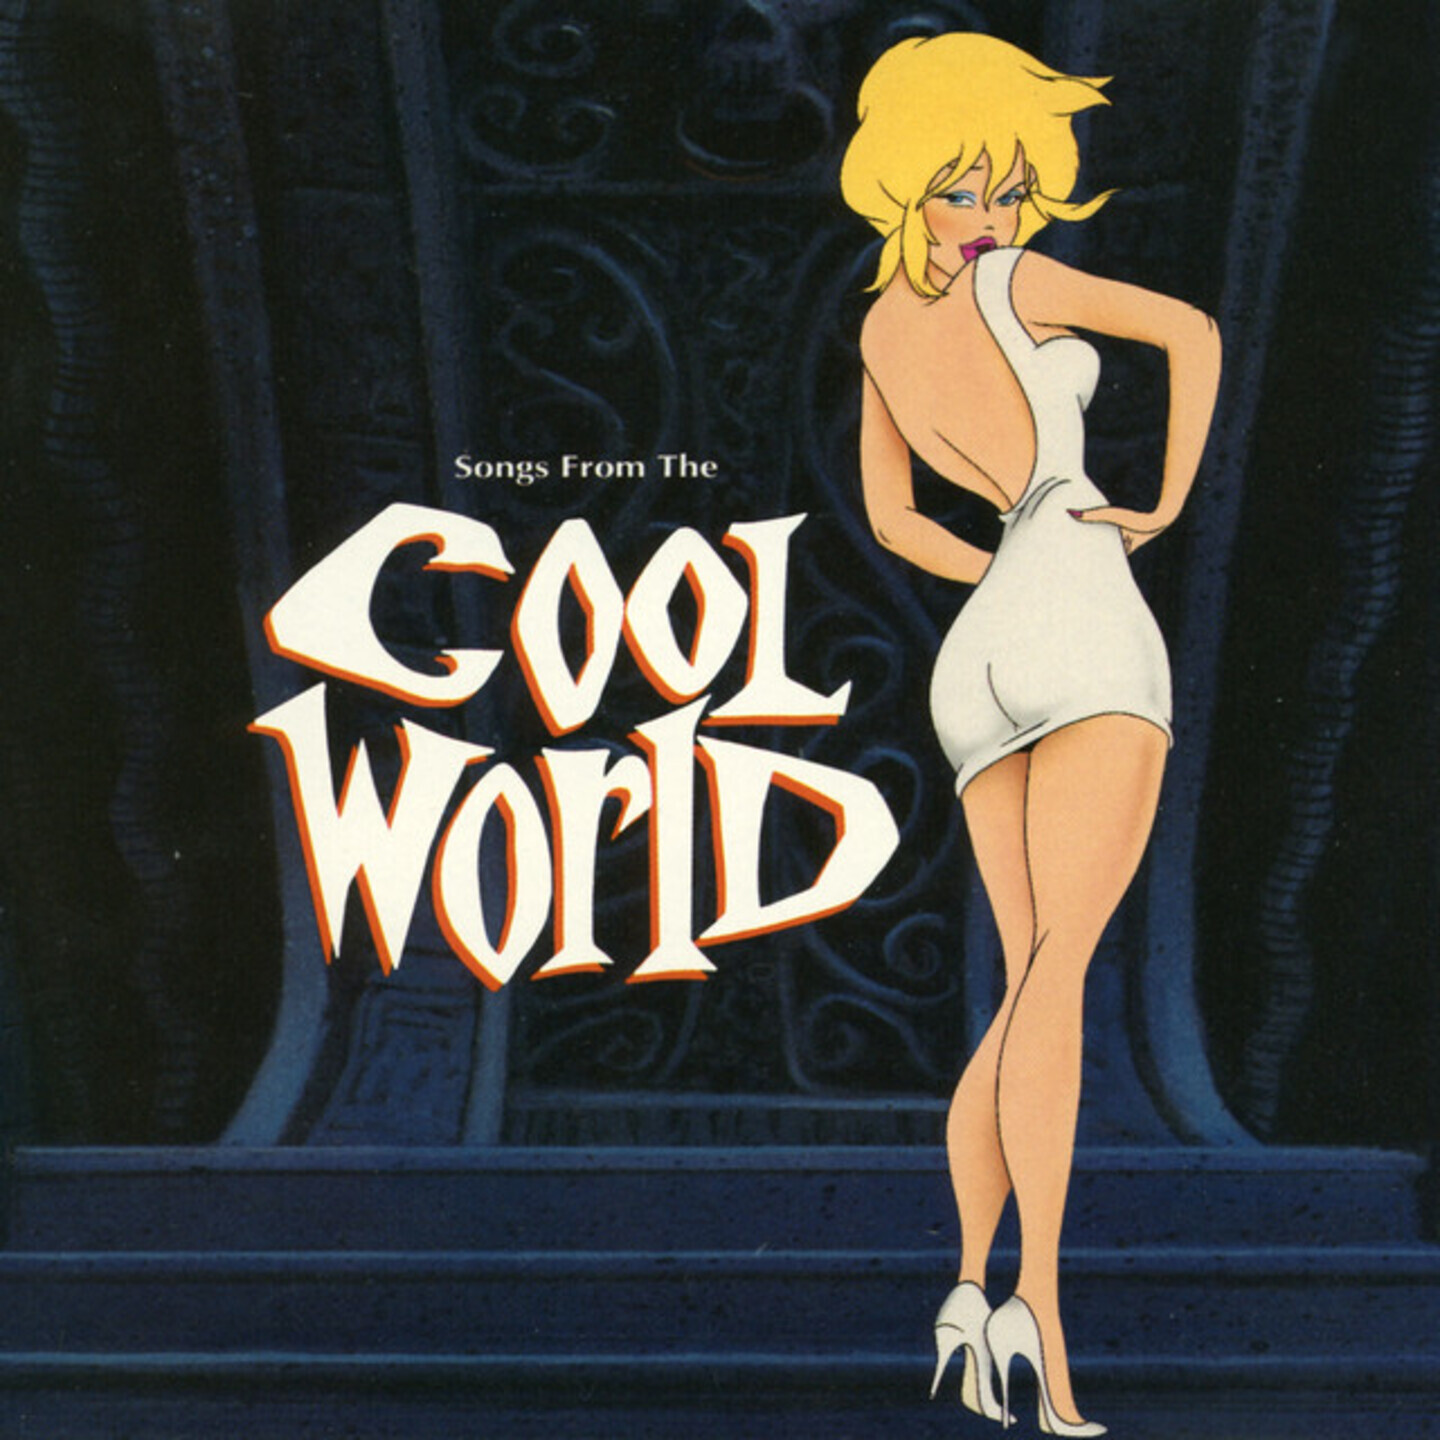 V/A	Songs From The Cool World (Music From And Inspired By The Motion Picture) 2xLP (Etched Side D)